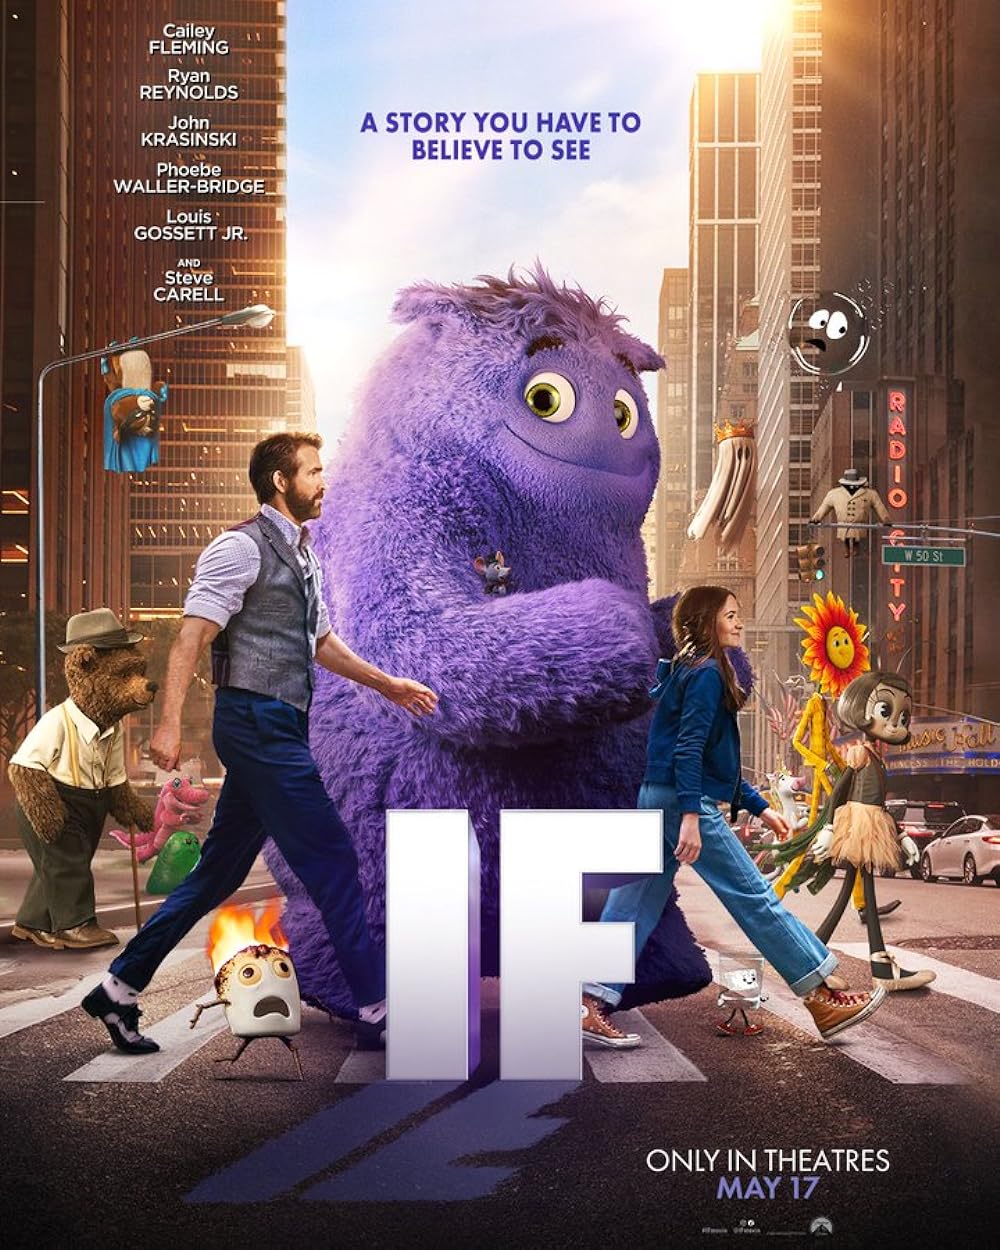 IF: Imaginary Friends Movie Review